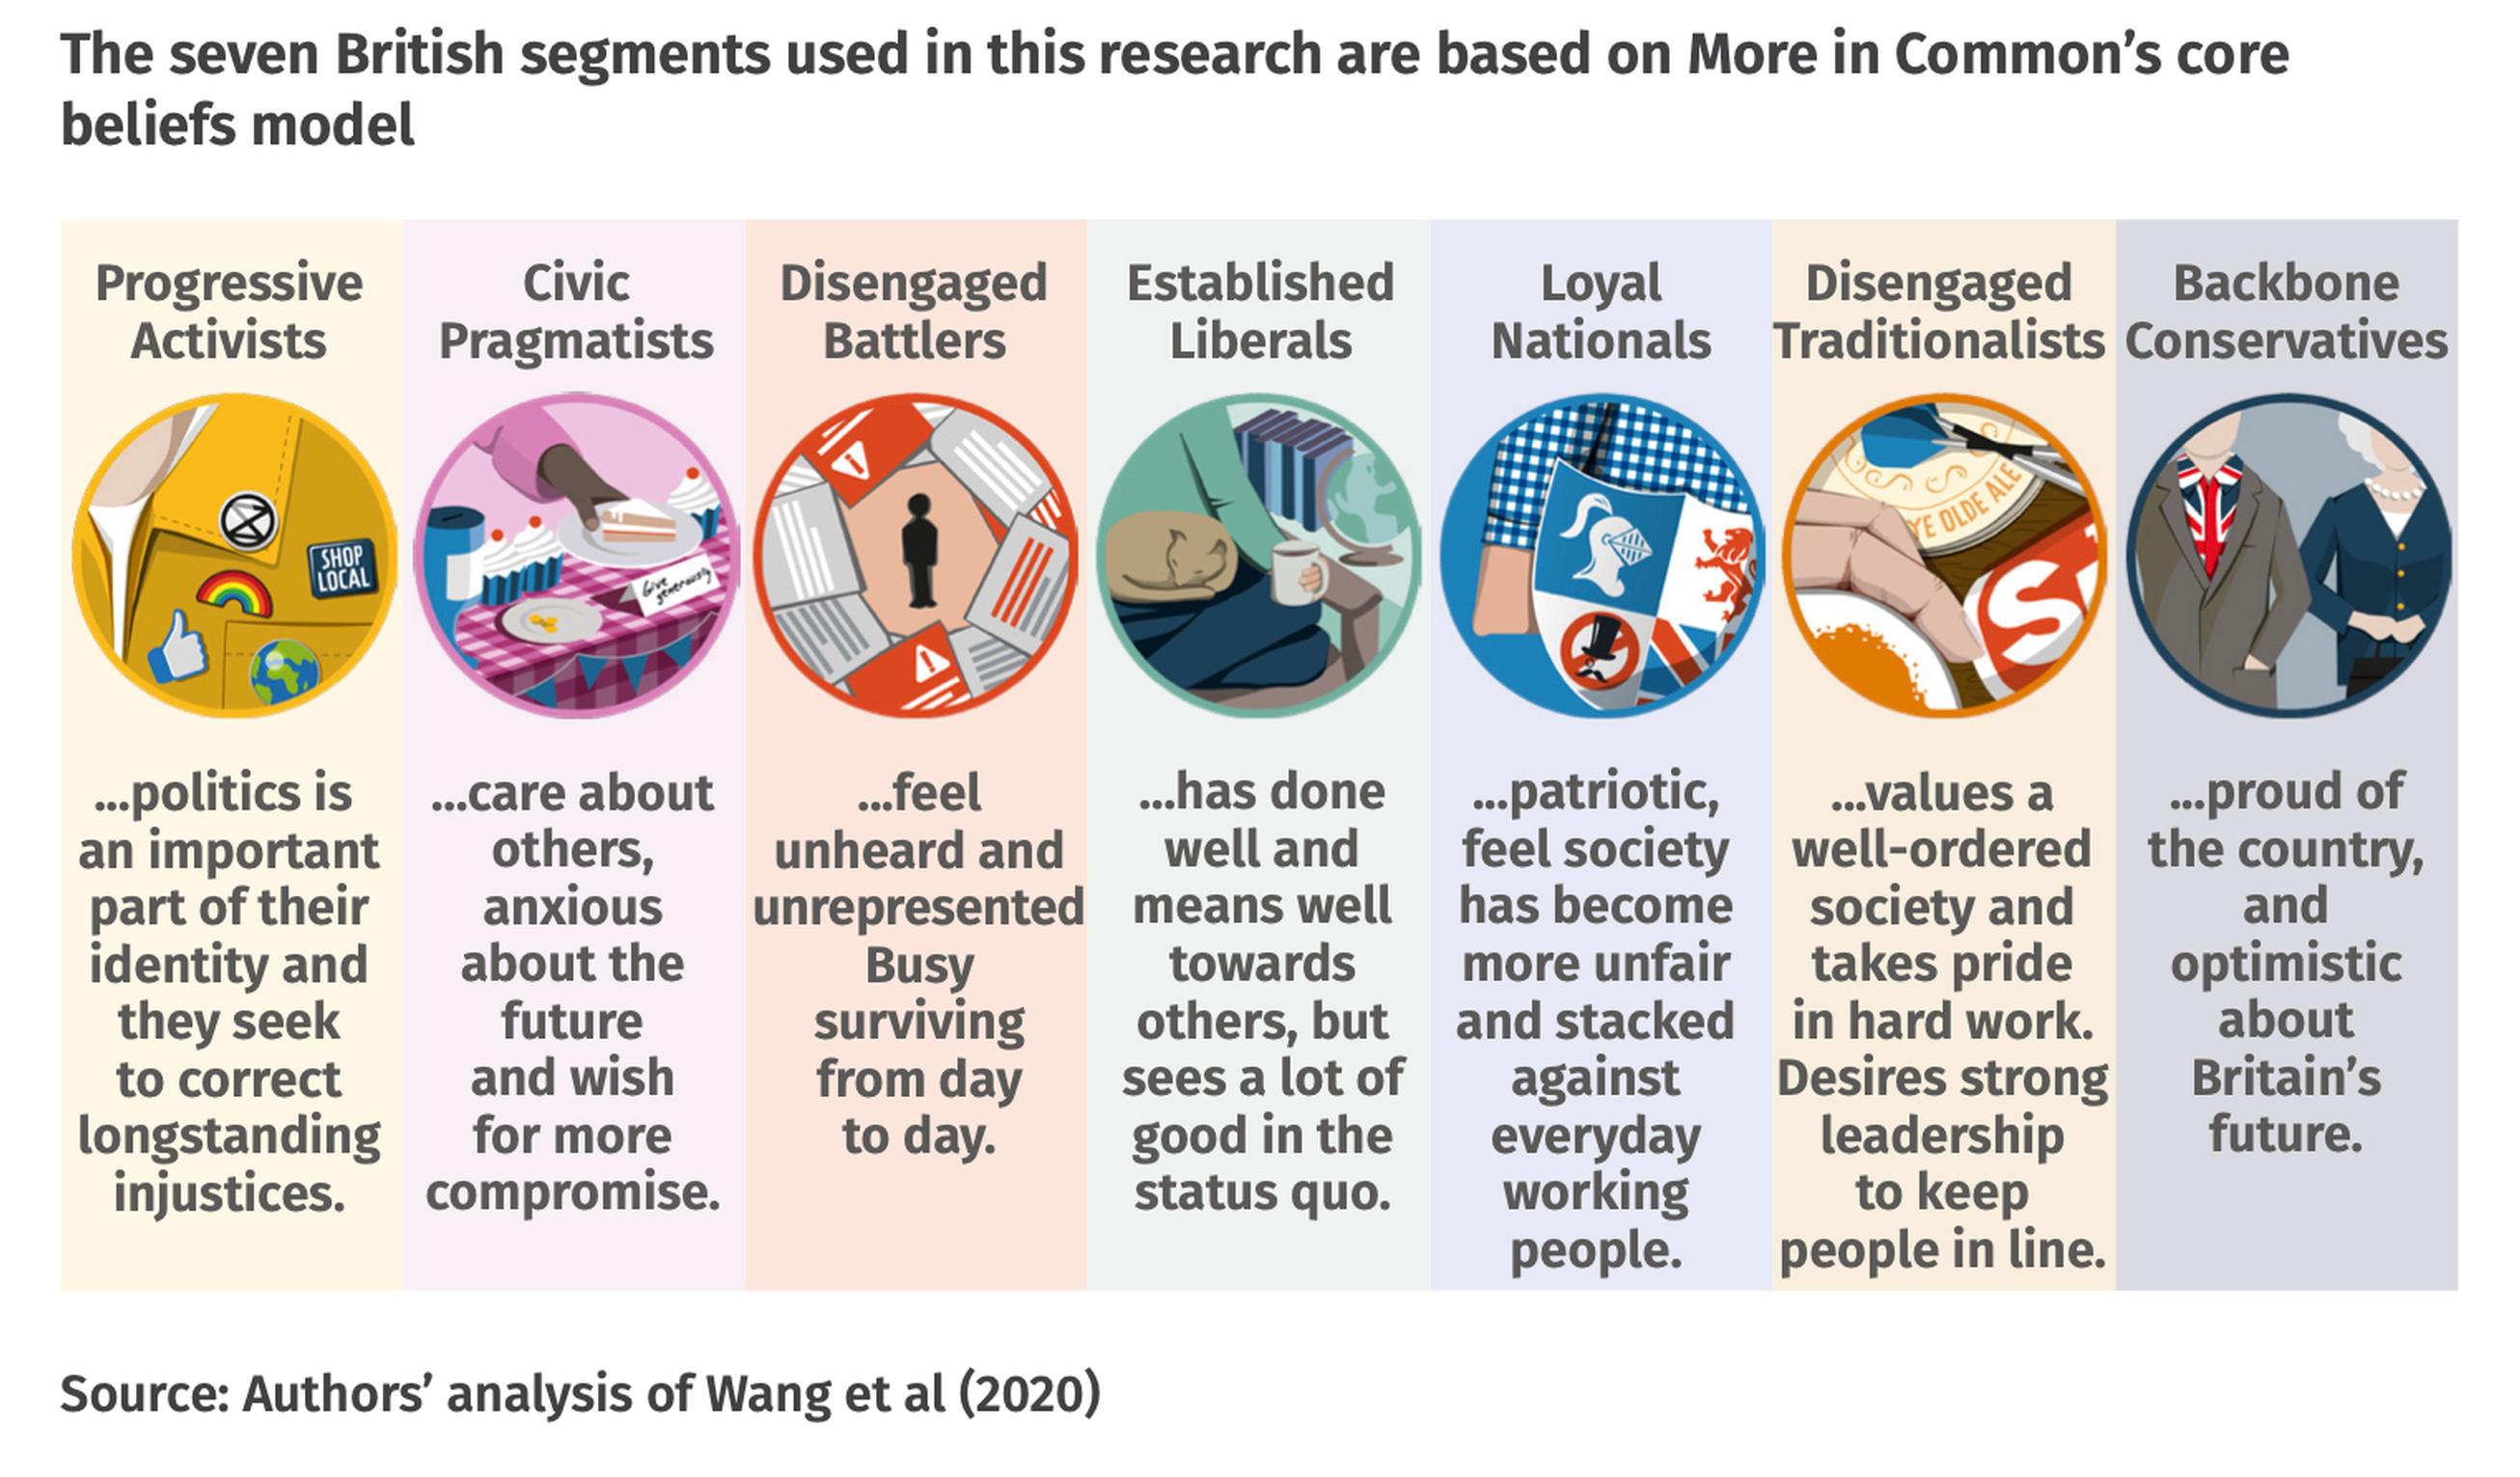 The seven British segments used in this research are based on More in Common’s core beliefs model